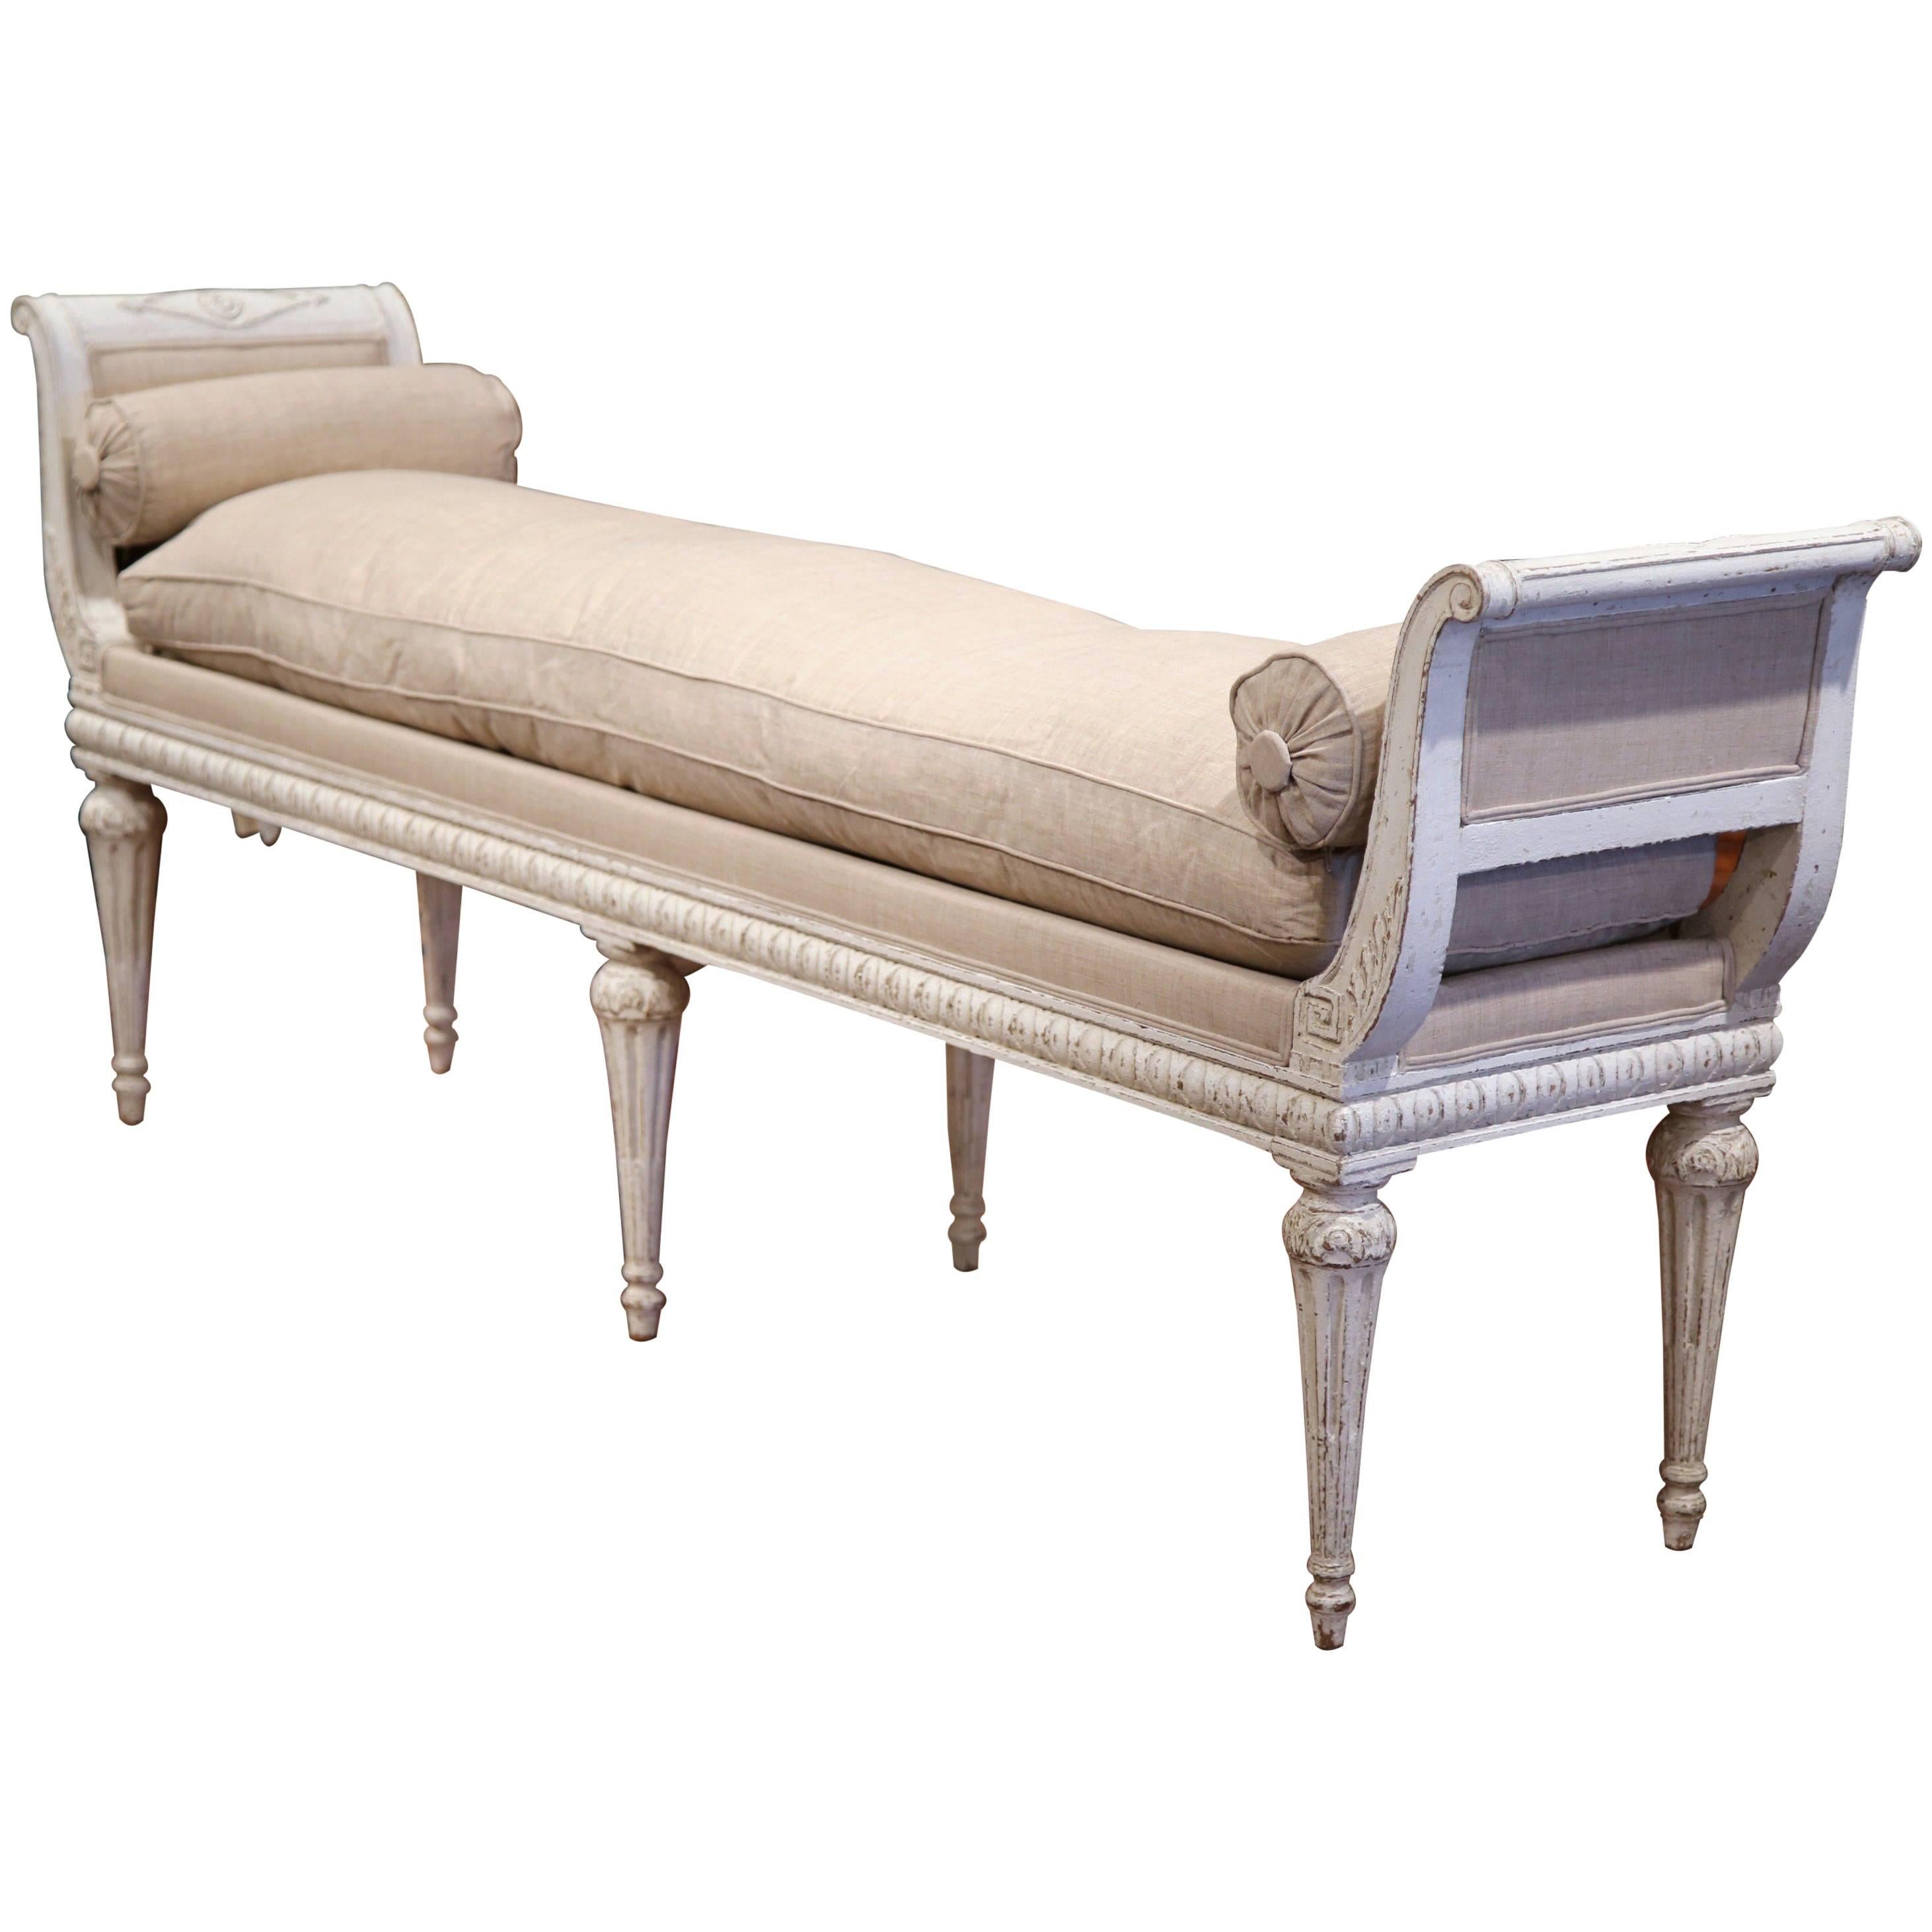 Late 19th Century French Directoire Carved Painted Six-Leg Bench with Cushion